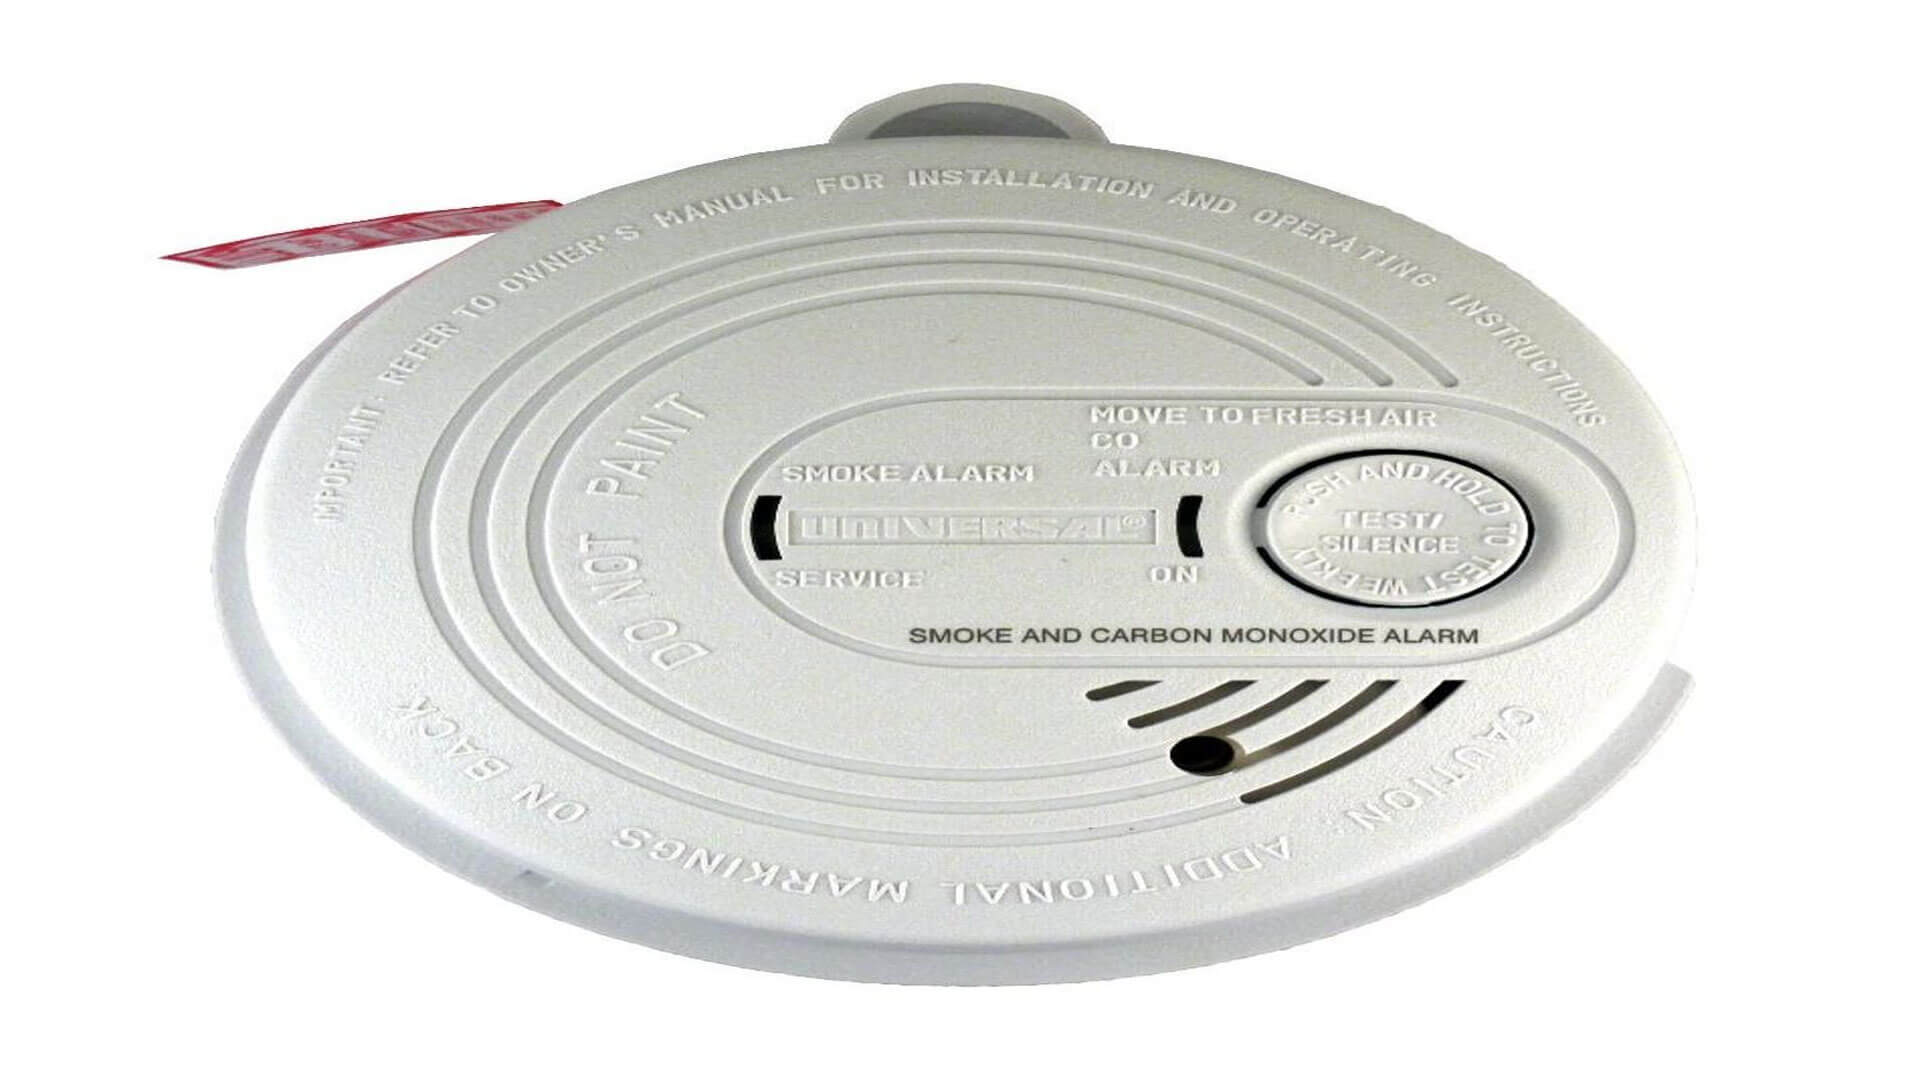 What is Red Blinking Light on Smoke Detector